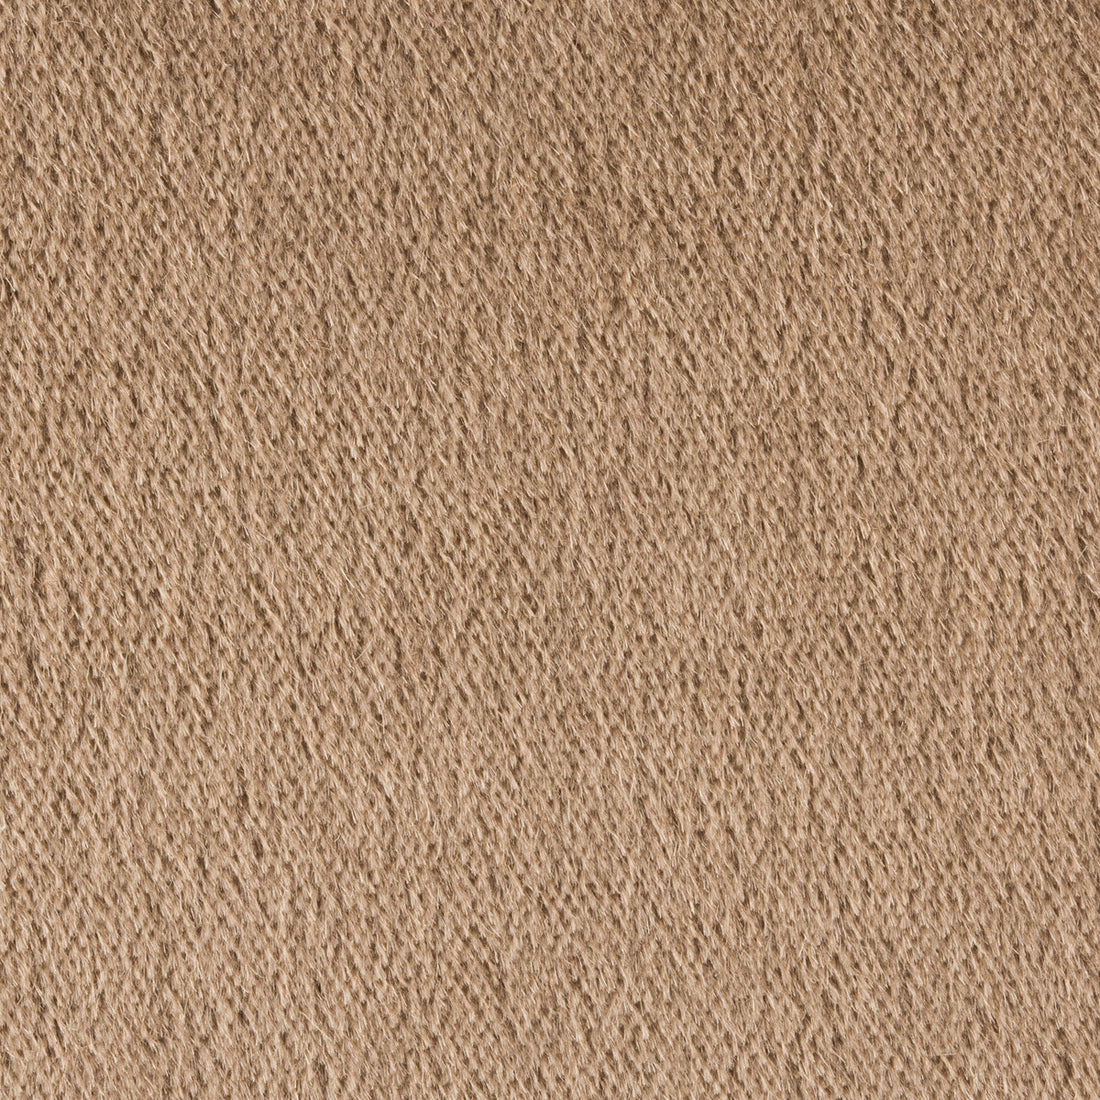 Plazzo Mohair fabric in mocha color - pattern 34259.800.0 - by Kravet Couture